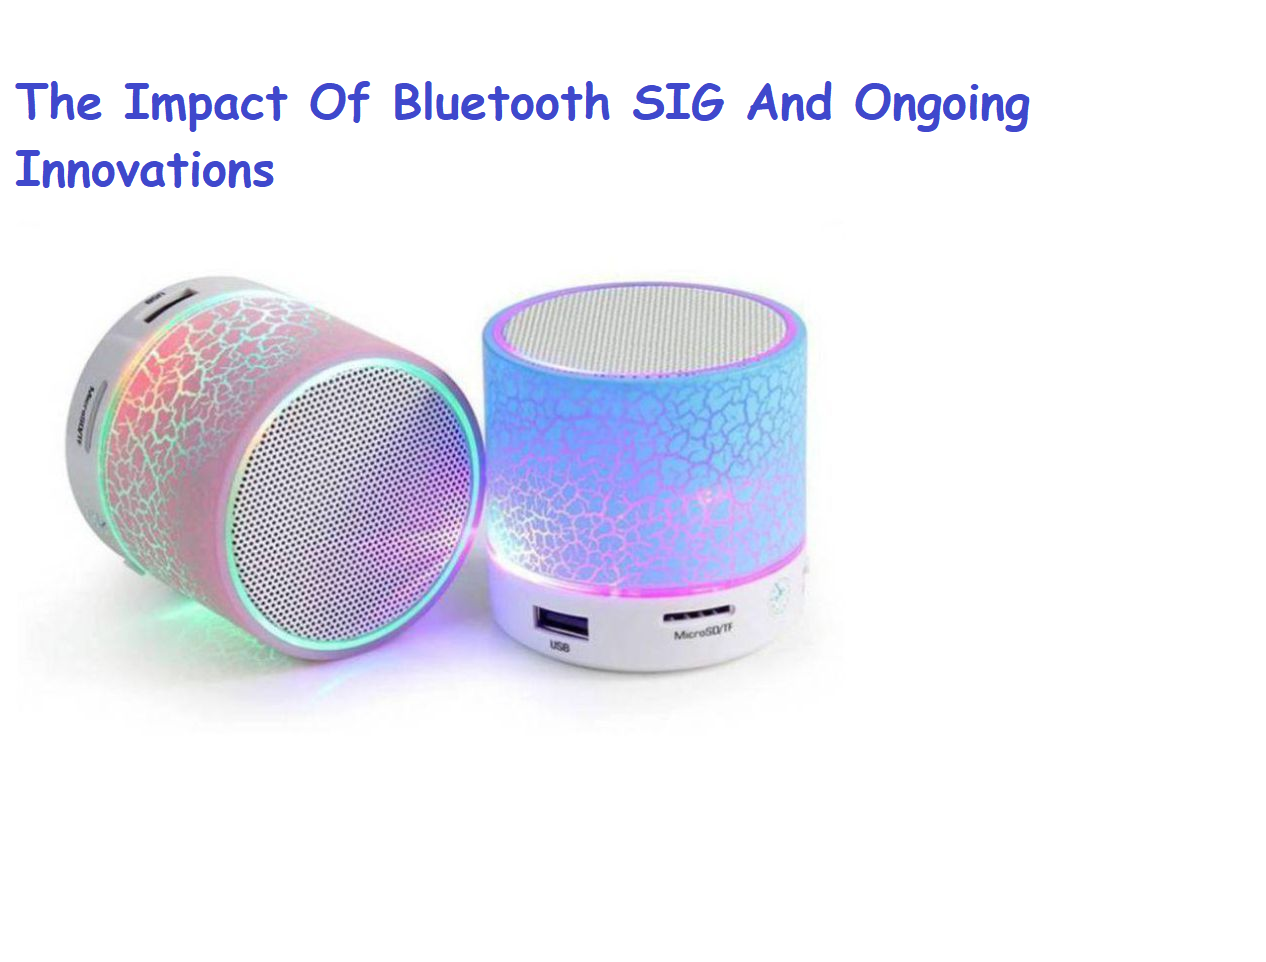 'the iimpact of bluetooth sig and going innovations' written, bluetooth speaker